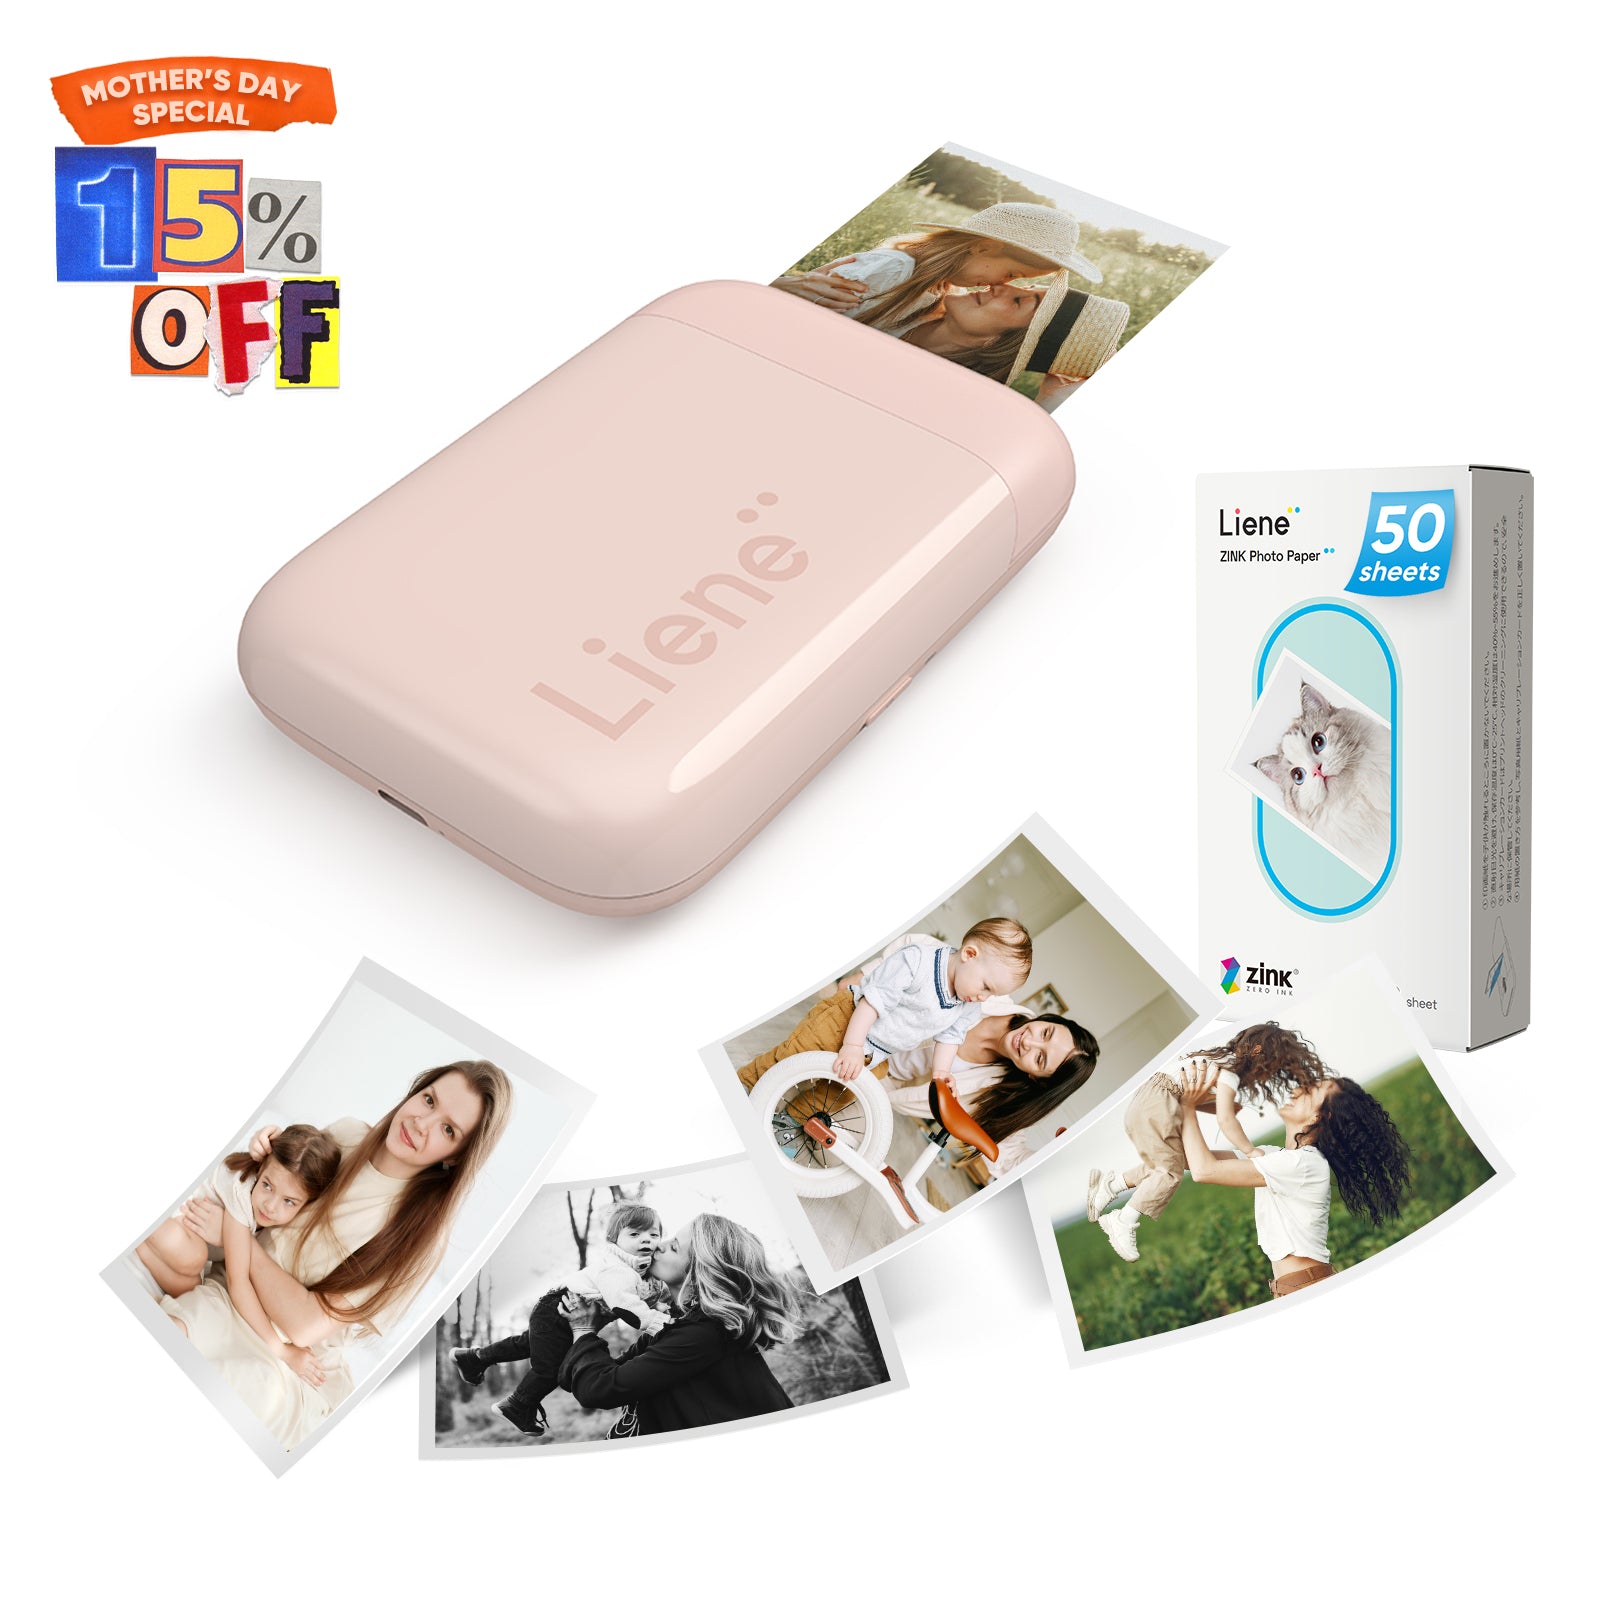 Liene Pearl K100 2x3" Portable Photo Printer - Pink (50 Zink Photo Papers)